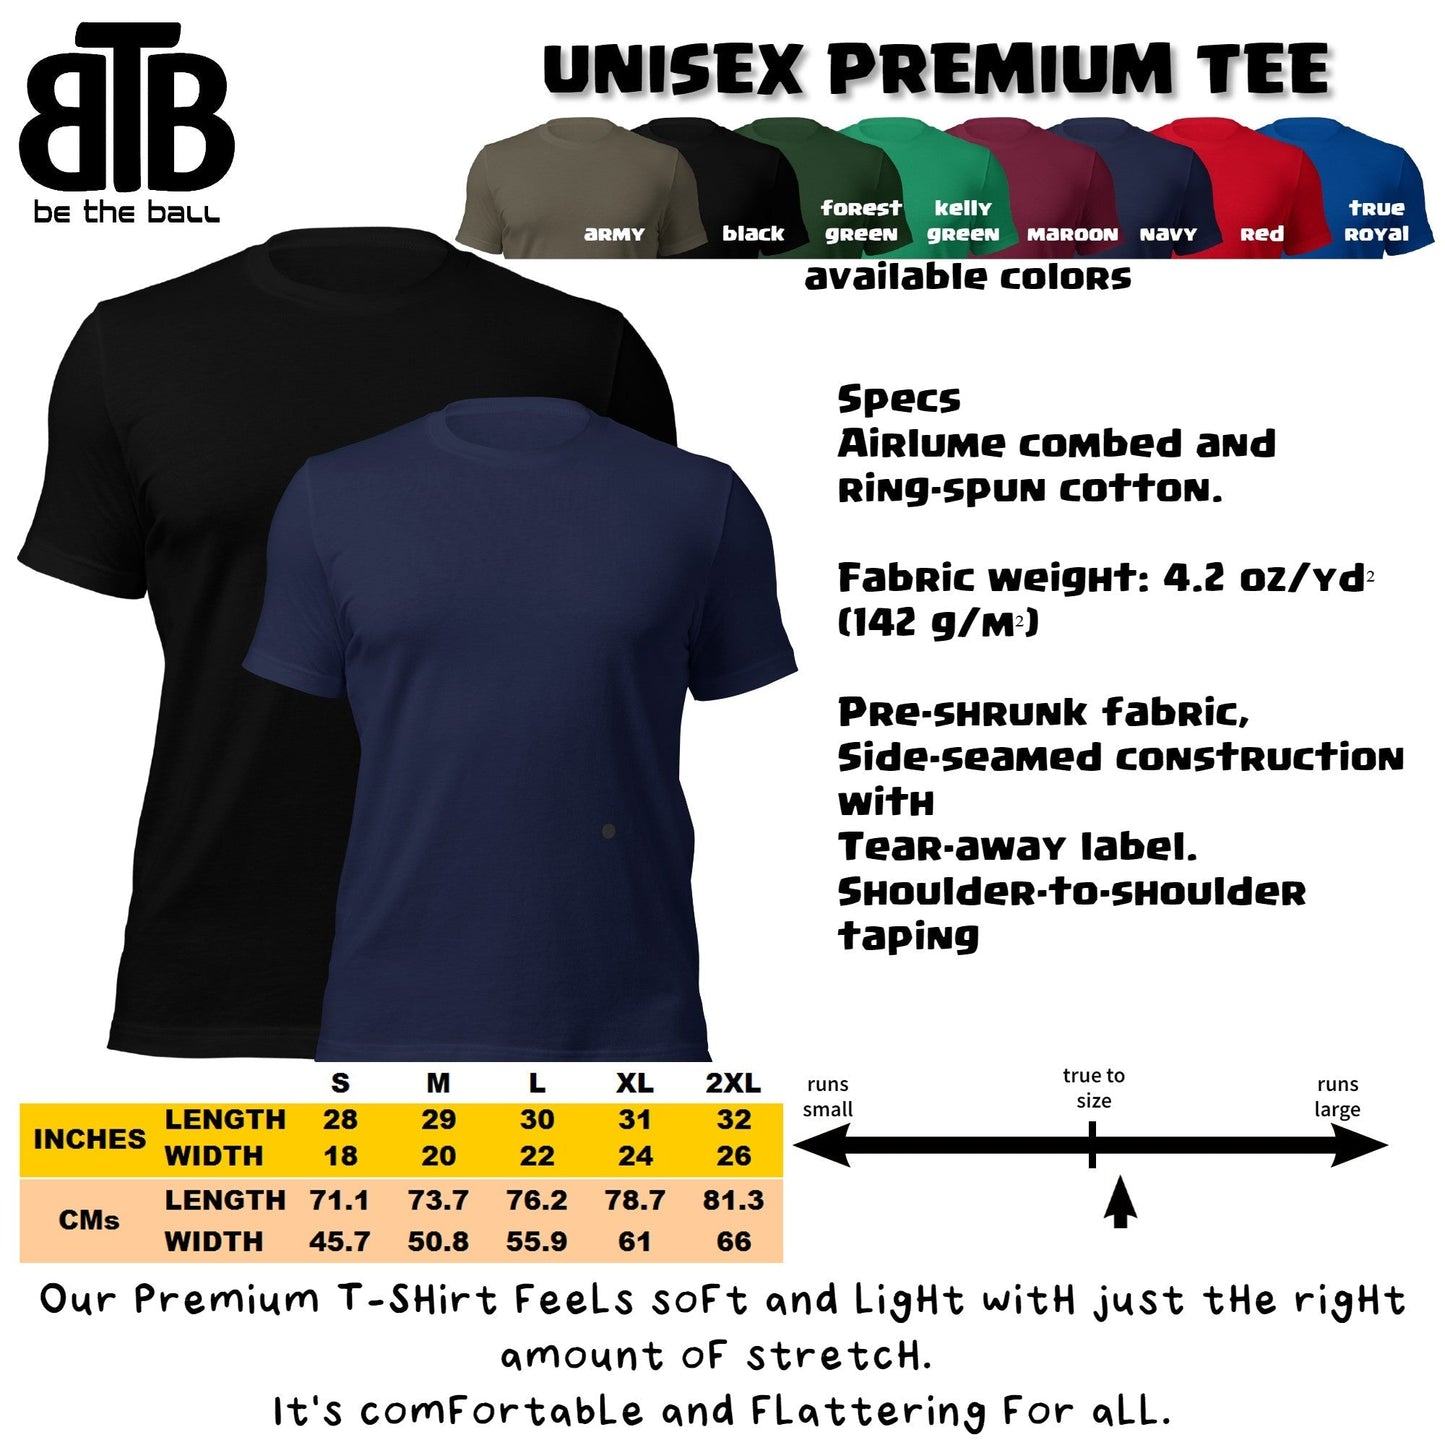 Tee it High and Let it Fly Golf TShirt and Hoodie is a Creative Golf Graphic design for Men and Women